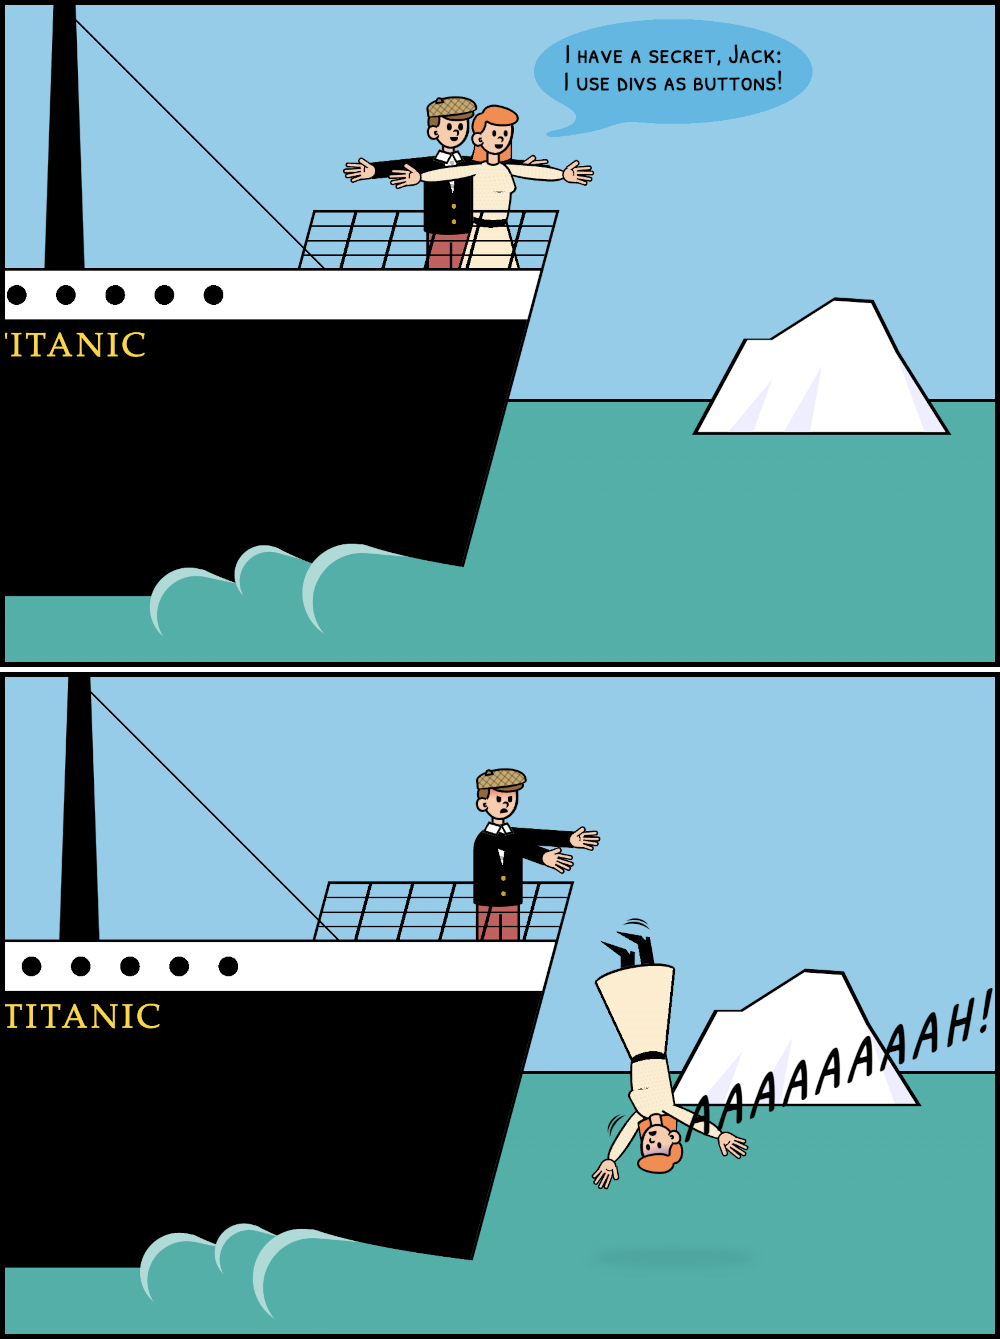 Comic with 2 panels parody of a scene of the movie Titanic. In the first panel, a man (Jack) and a woman (Rose) are at the front of a ship named Titanic, with their arms extended and smiling. Rose says: 'I have a secret Jack: I use divs as buttons'. In the second panel, Jack has pushed Rose over the rails and she falls into the ocean.